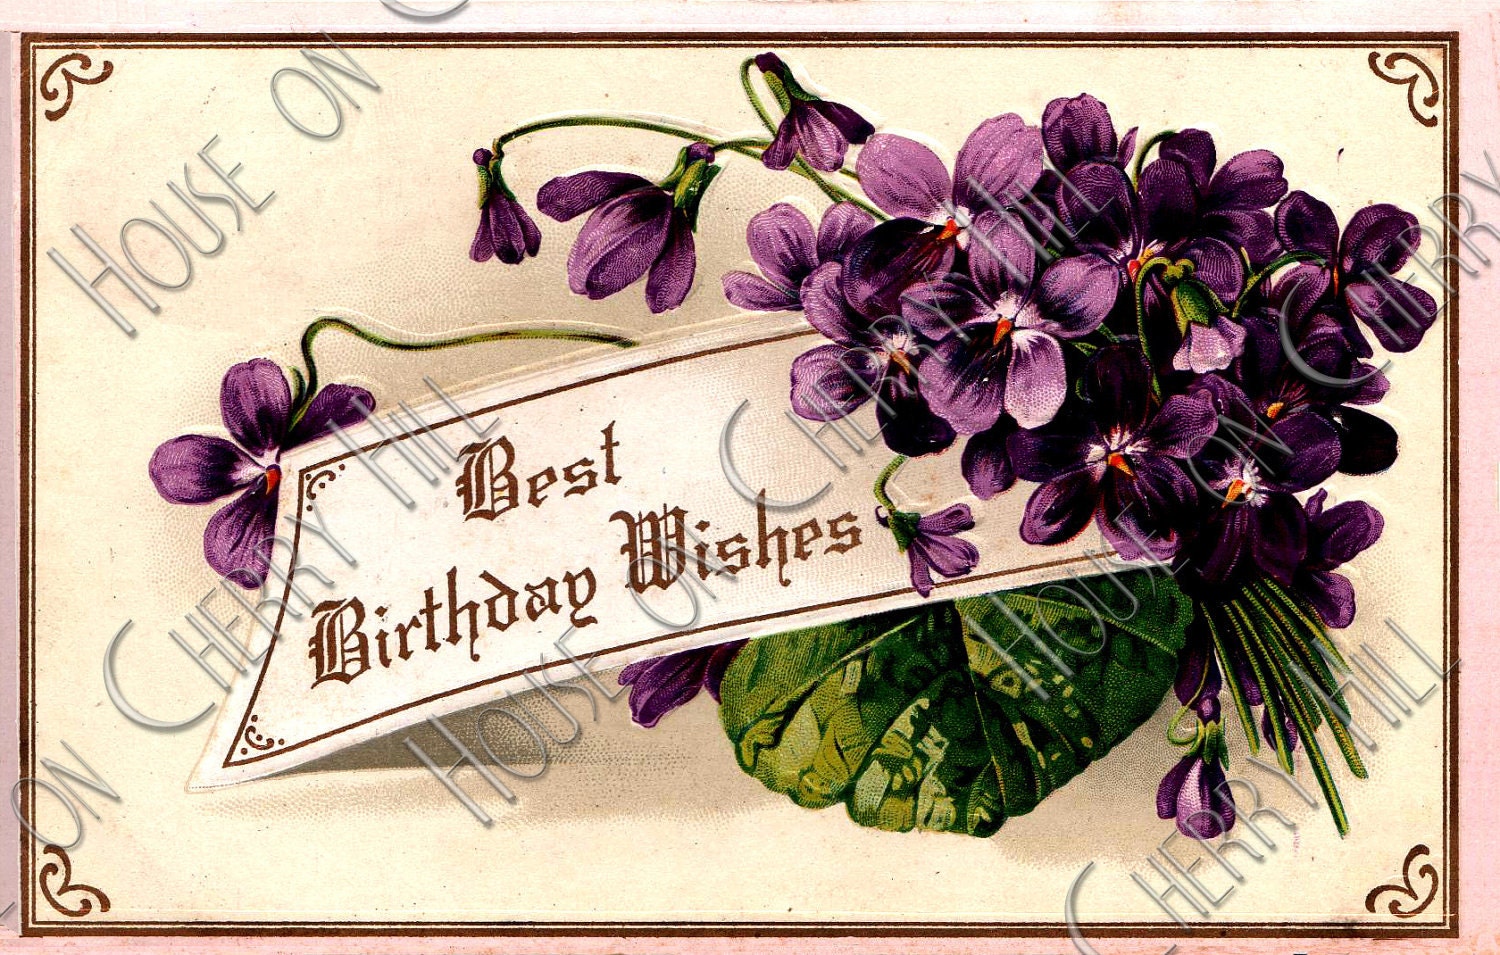 Spring of Violets Digital Postcard - Best wishes - romantic - purple - flower - remember - modest - sweet - Victorian - no.230 - HouseonCherryHill